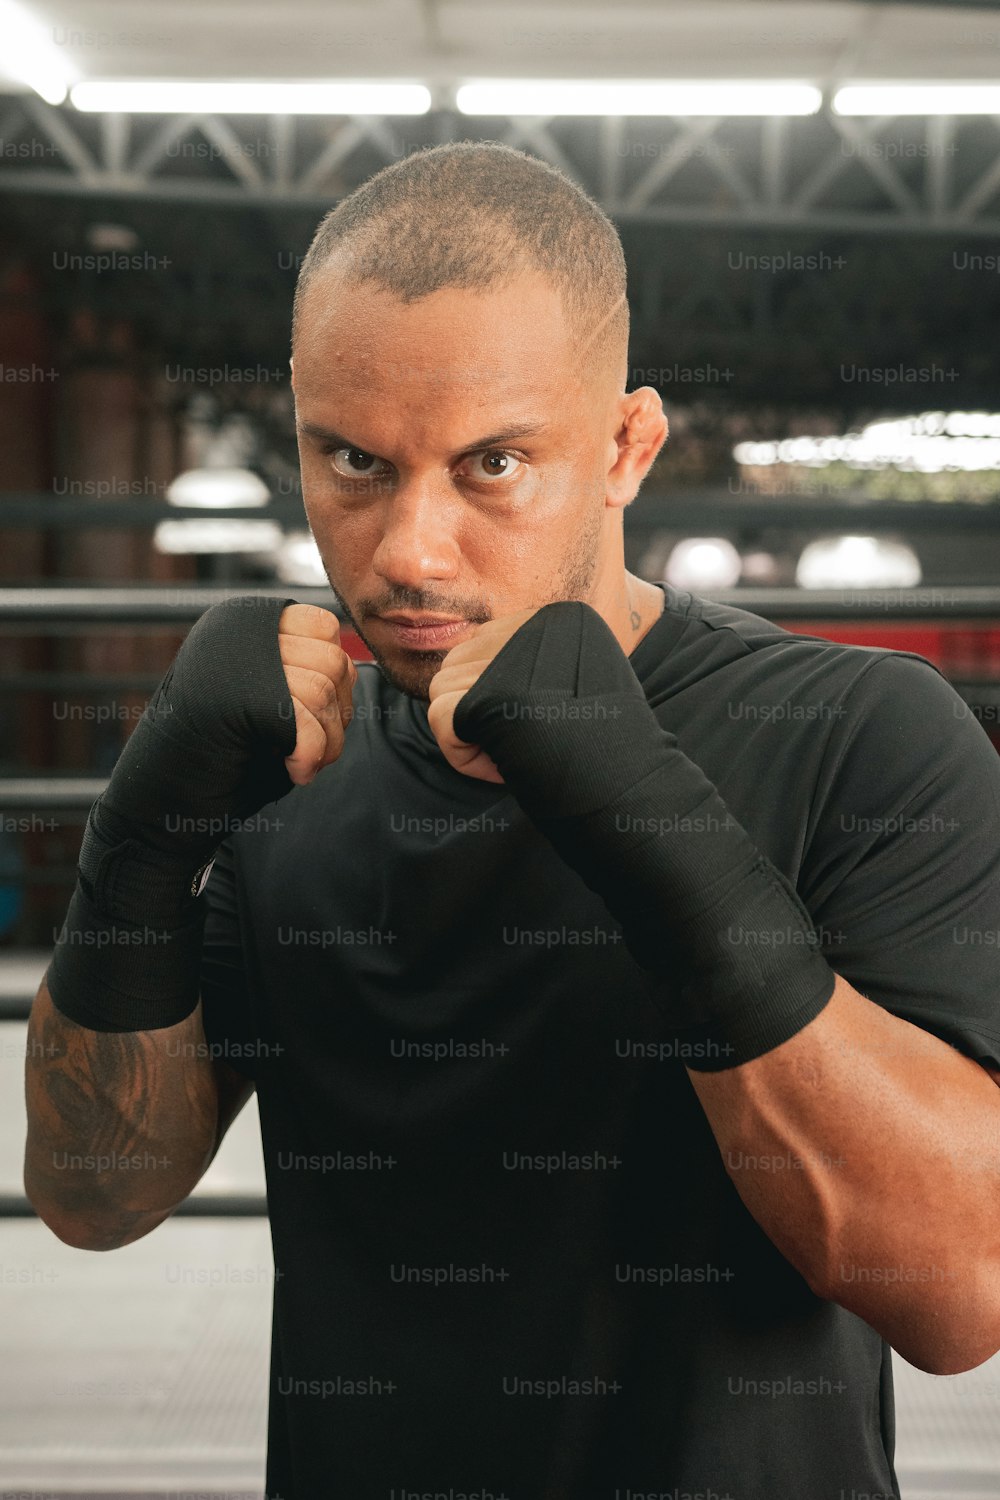 a man wearing a black shirt and boxing gloves